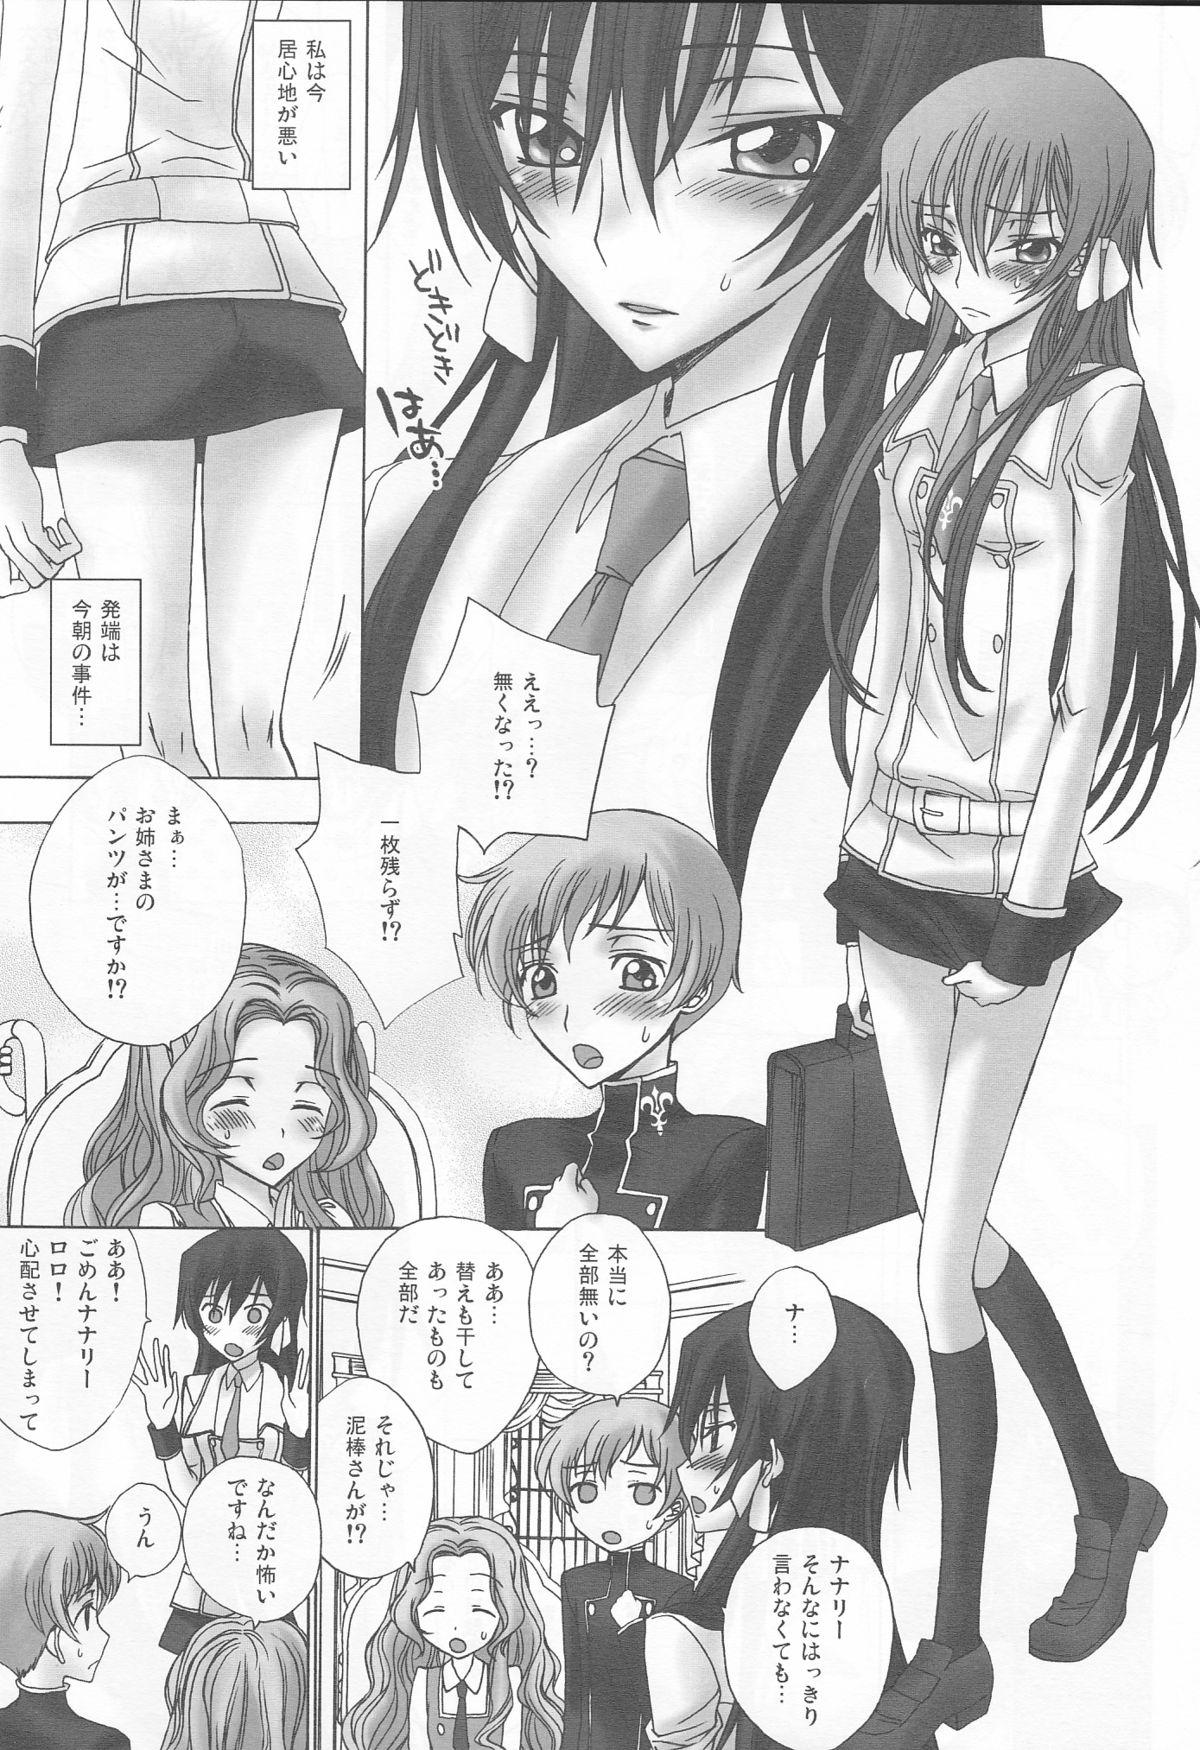 Dirty Talk Lyrical Rule StrikerS - Code geass Free Amature - Page 5